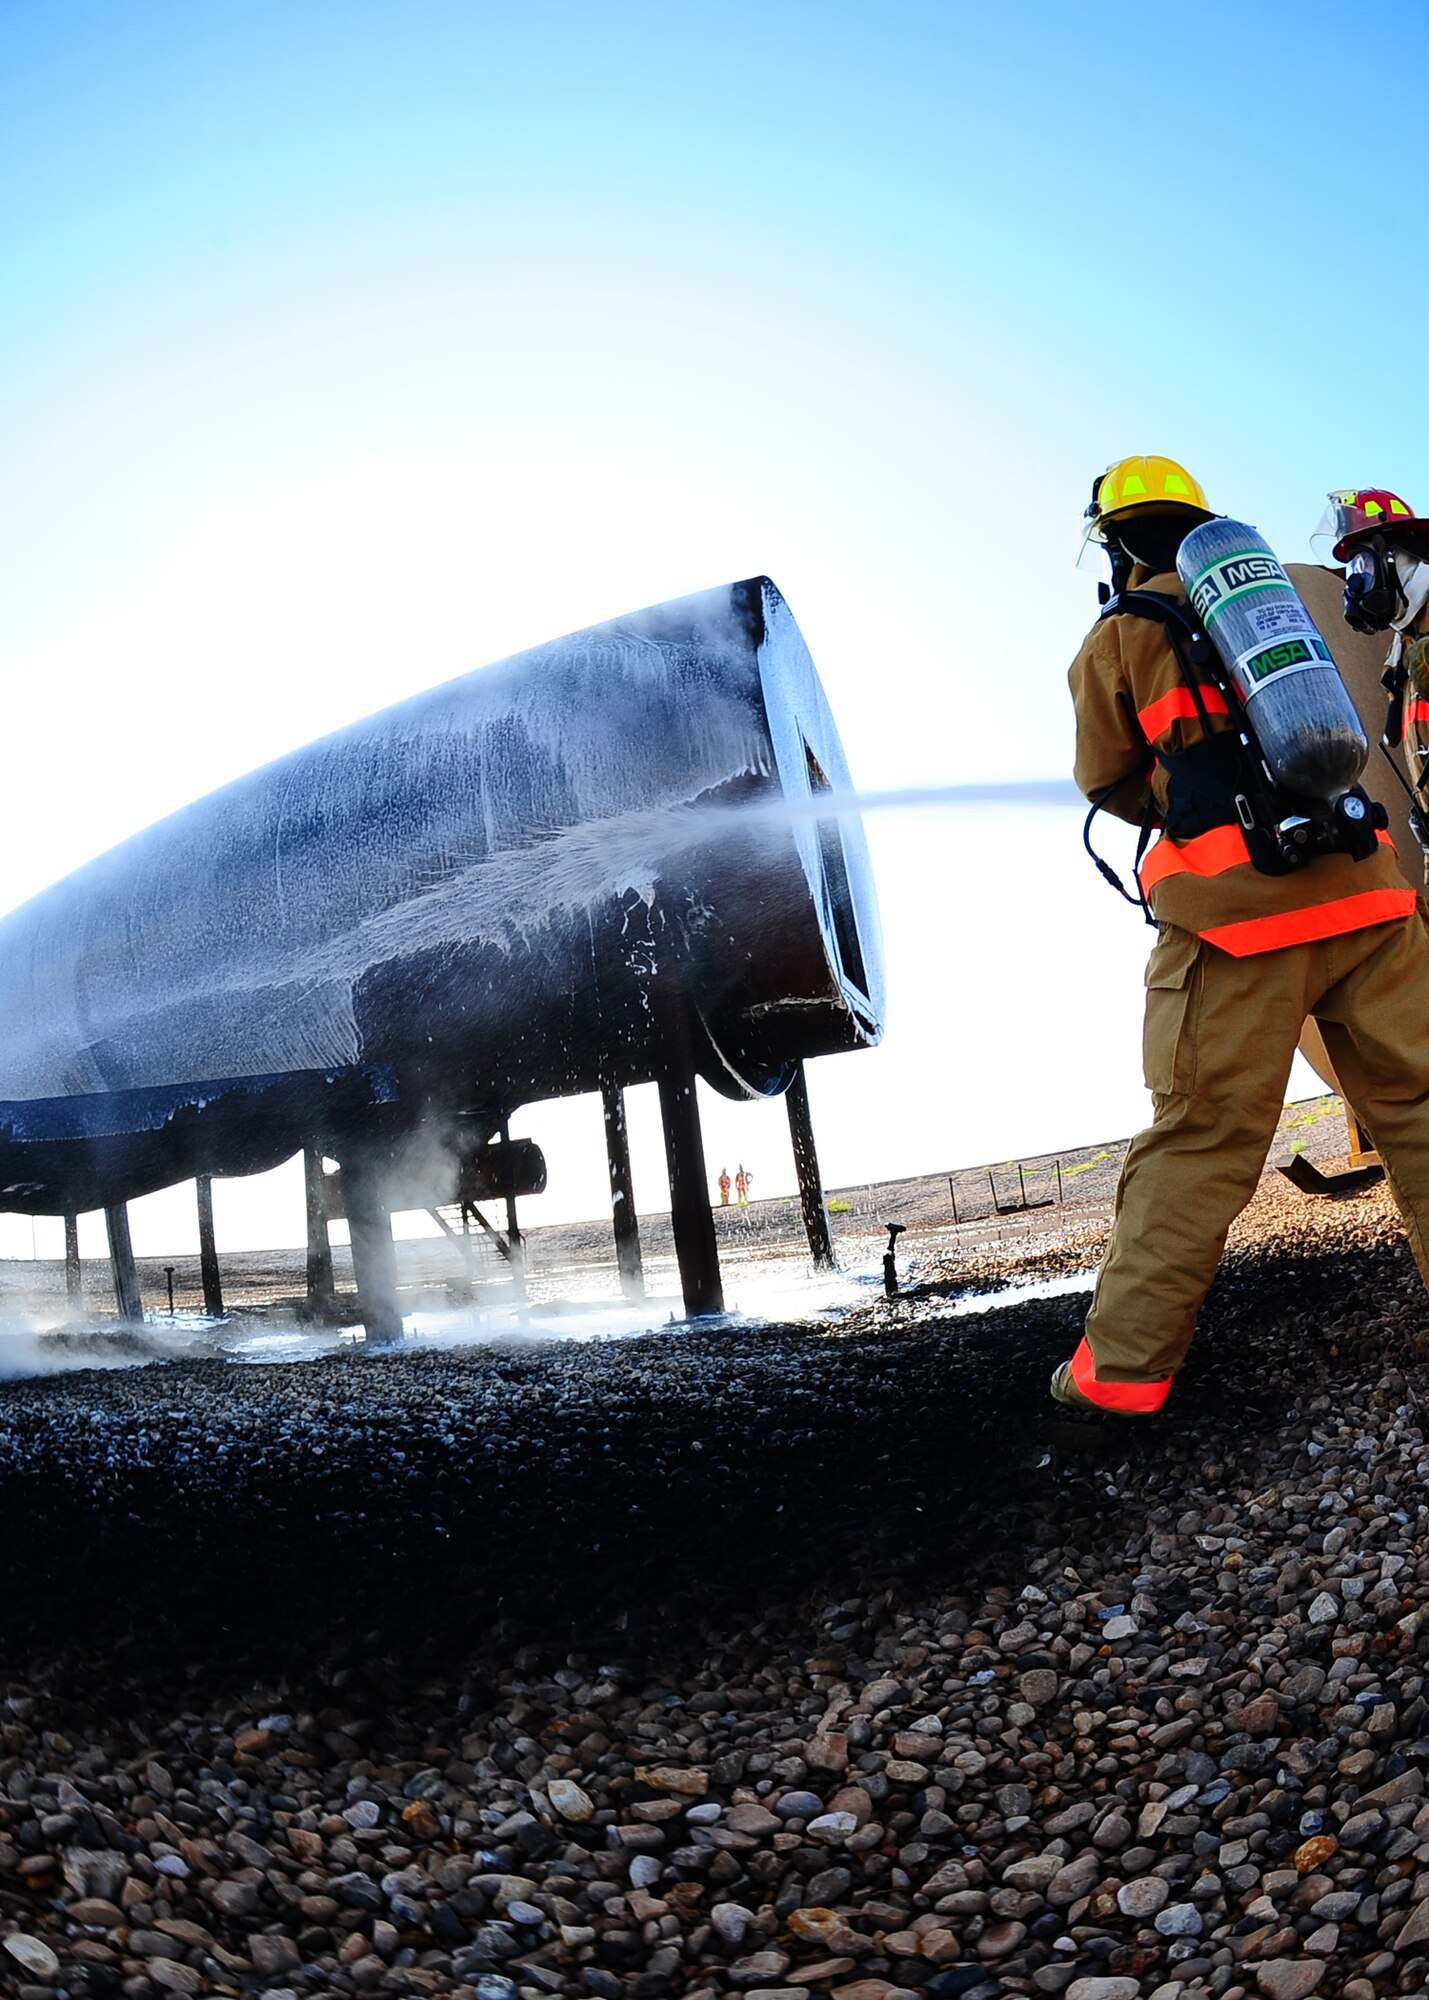 DYESS AIR FORCE BASE, Texas – Airman 1st Class Jonathan Fish, 7th Civil Engineer Squadron fire fighter, extinguishes a burning aircraft at the burn pit here Aug. 11 during a base training exercise. Training exercises help determine how well base personnel are prepared to handle real life threats, and to see what improvements might be made to increase the base’s level of readiness.
